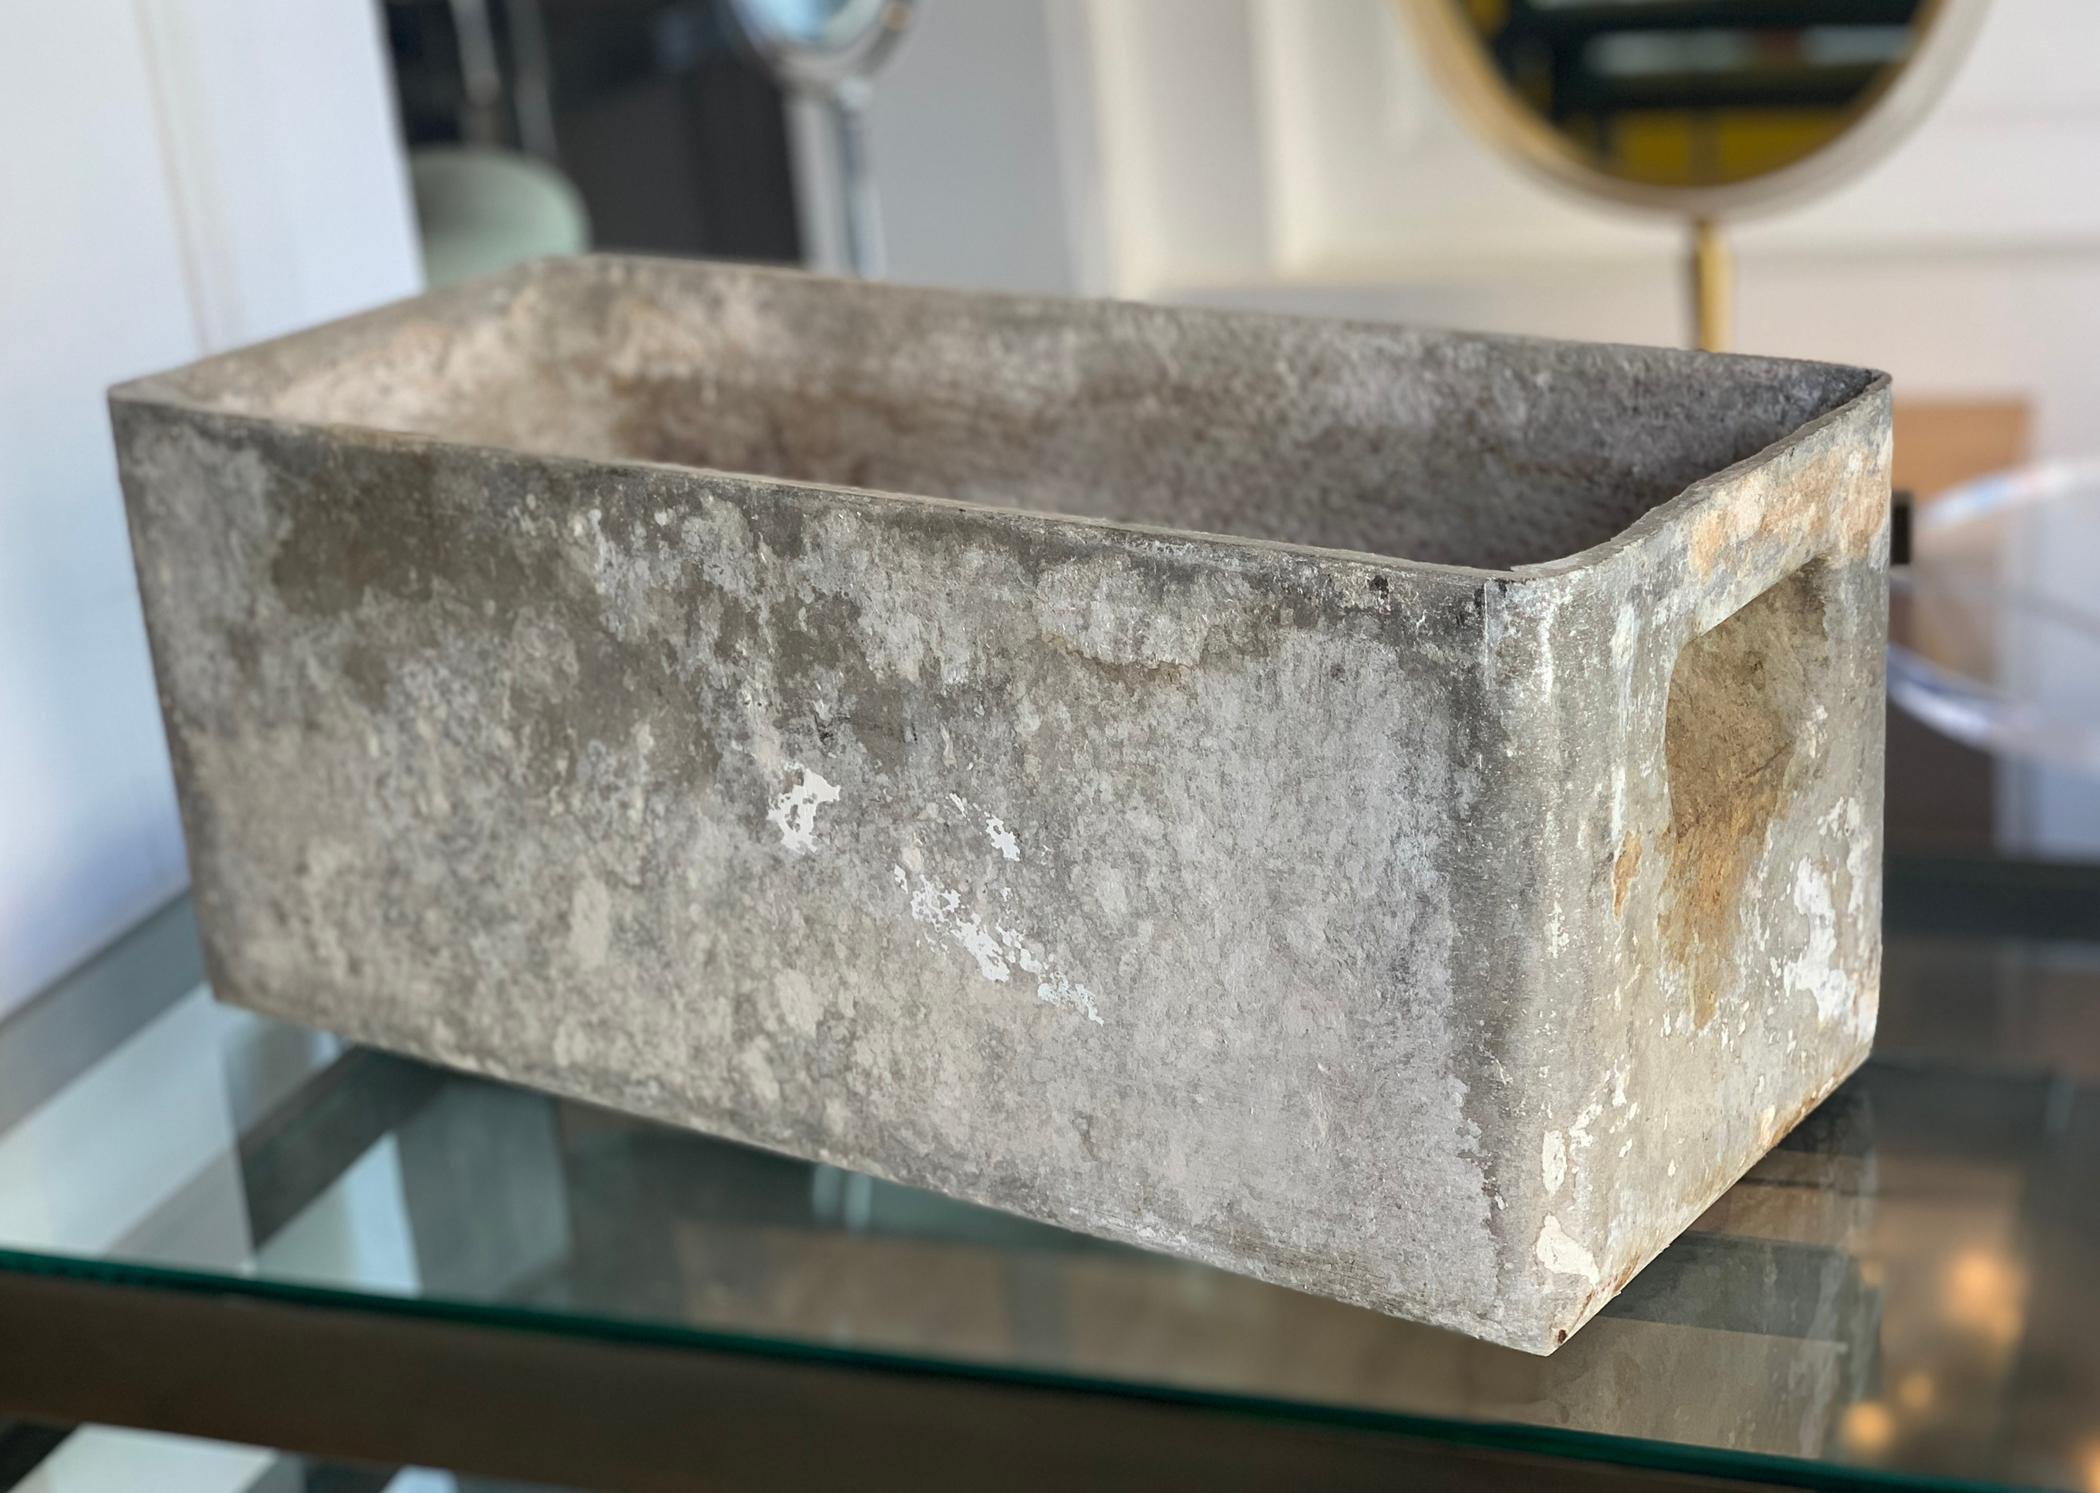 Beautiful cement planter in excellent condition stamped JM 145, we have 3 pieces available all 3 are the same shape and size.
Excellent condition, they can be used indoors or outdoors.
Measures: 19.75